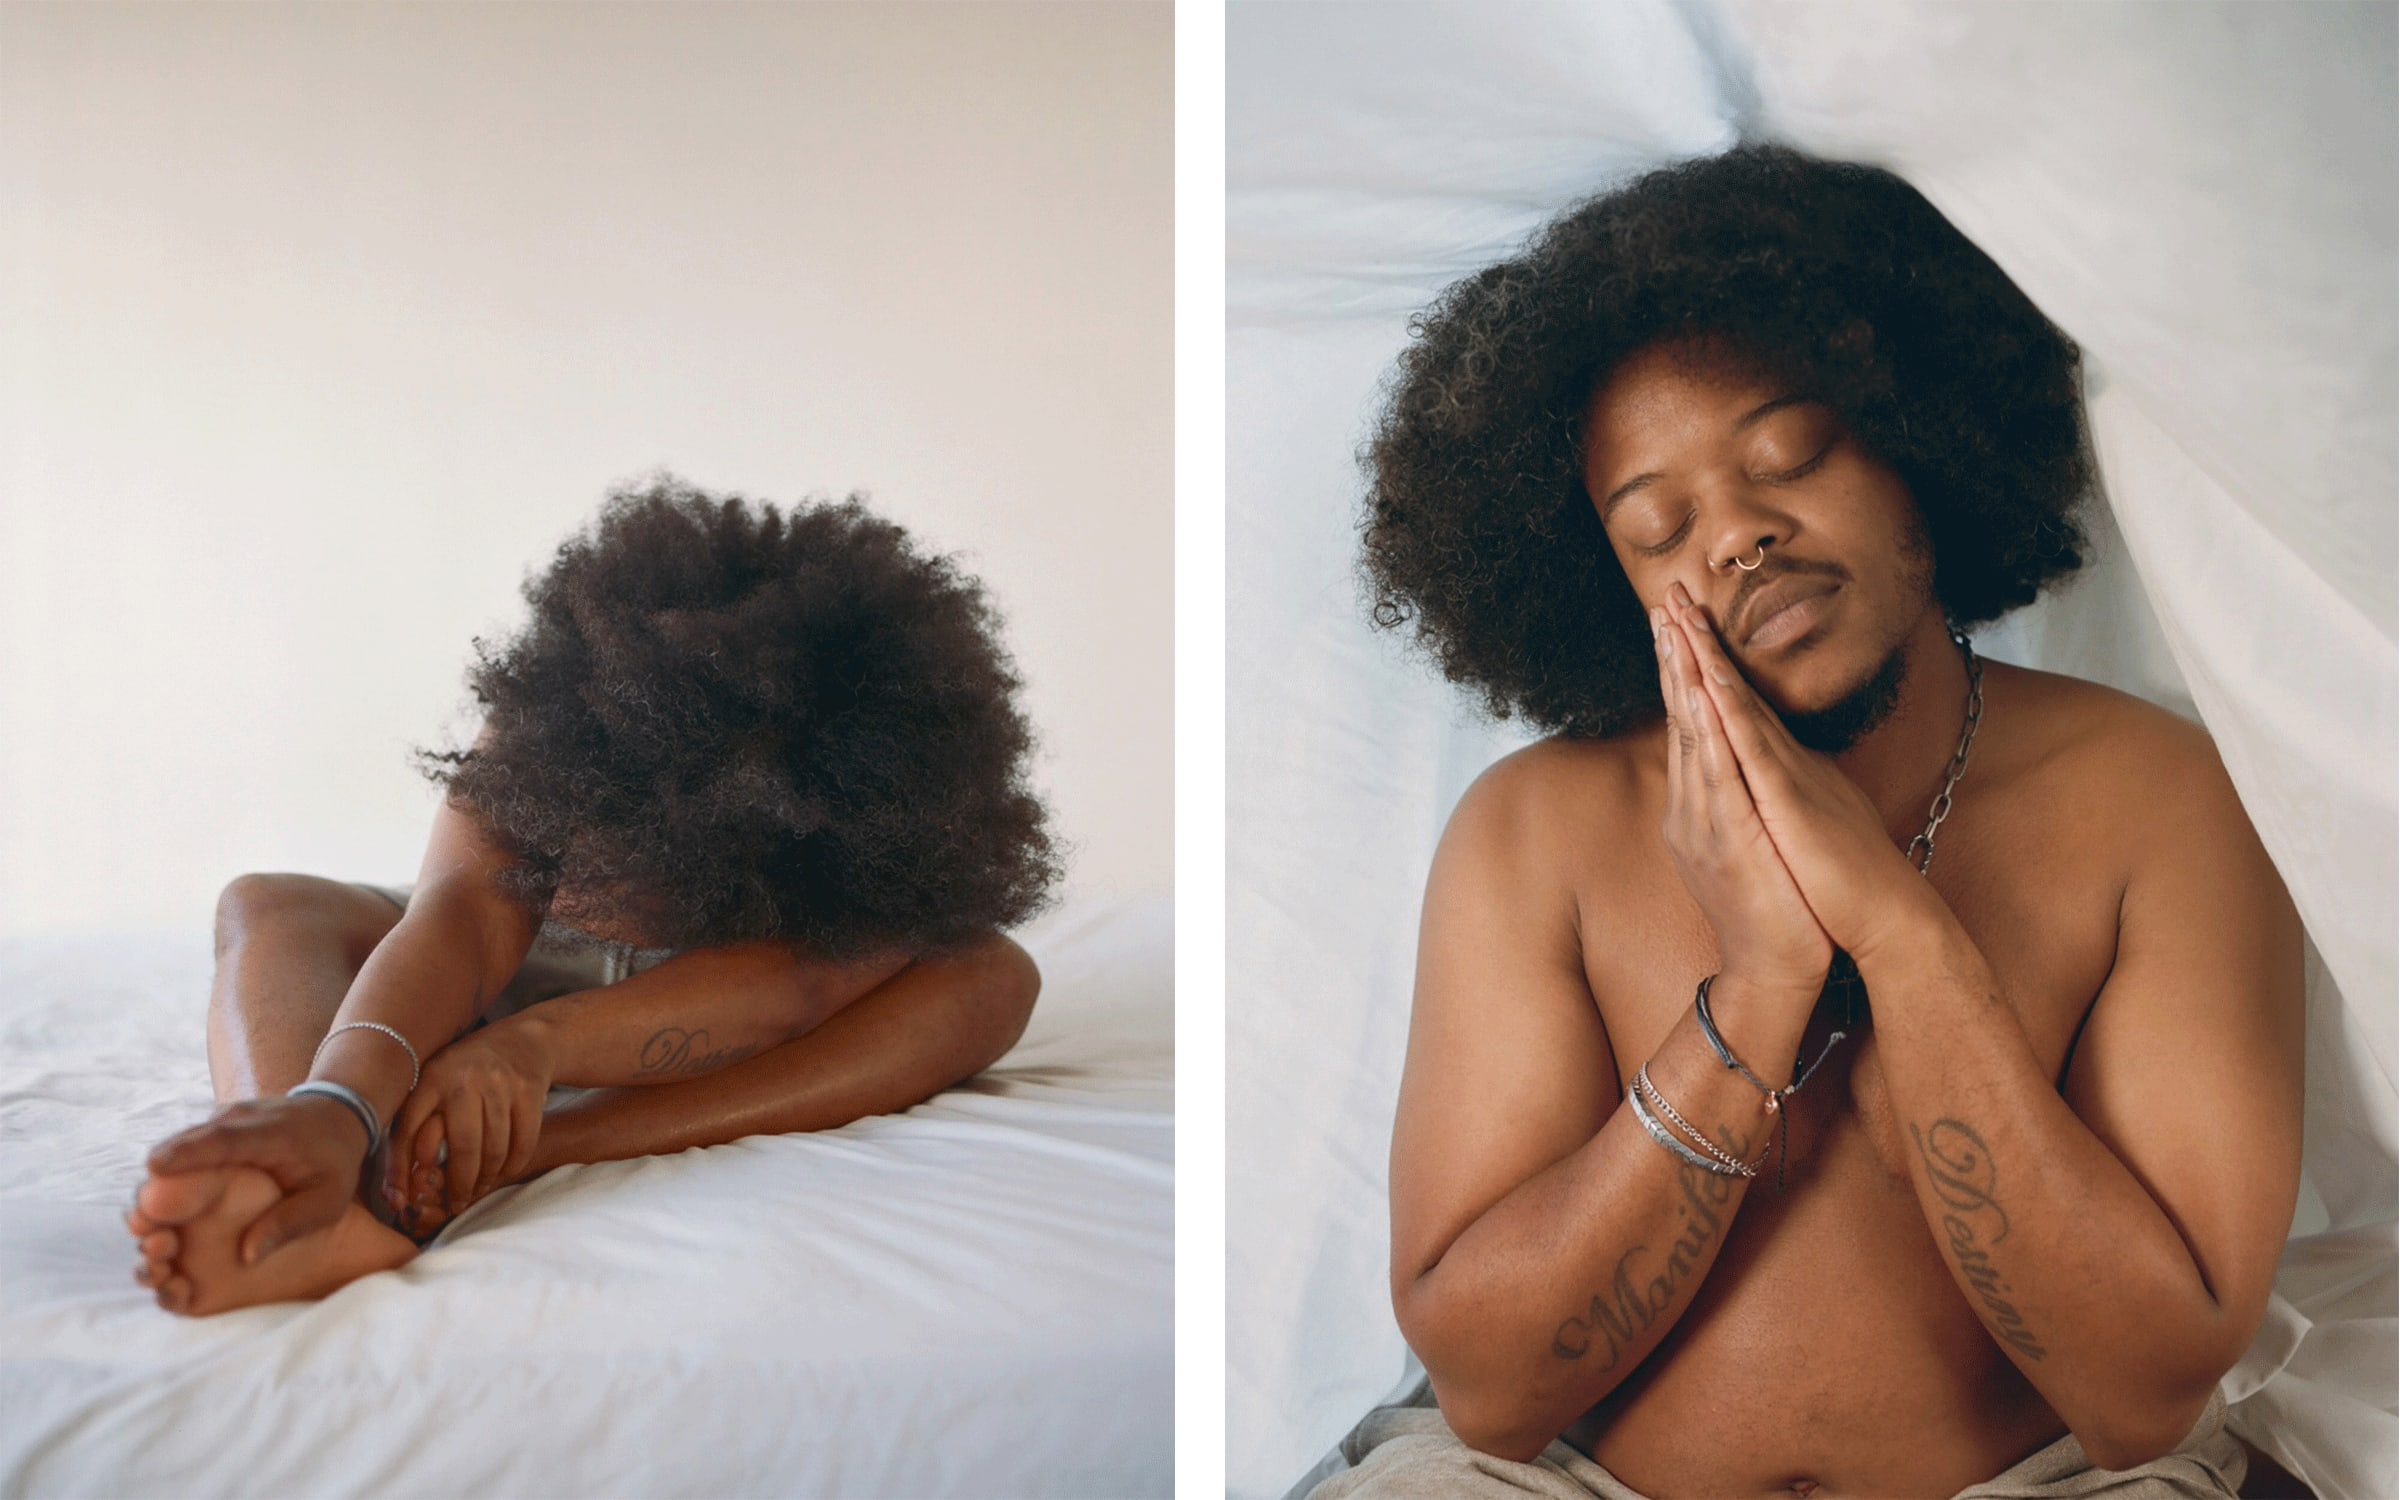 Photographs by Texas Isaiah, from the series ’It’s the Starkness of the Day’, 2023. Courtesy of the artist and Residency Art Gallery. Left: A Recollection: My Grandson’s Stretch. Right: Prologue: My Grandson’s Prayer.